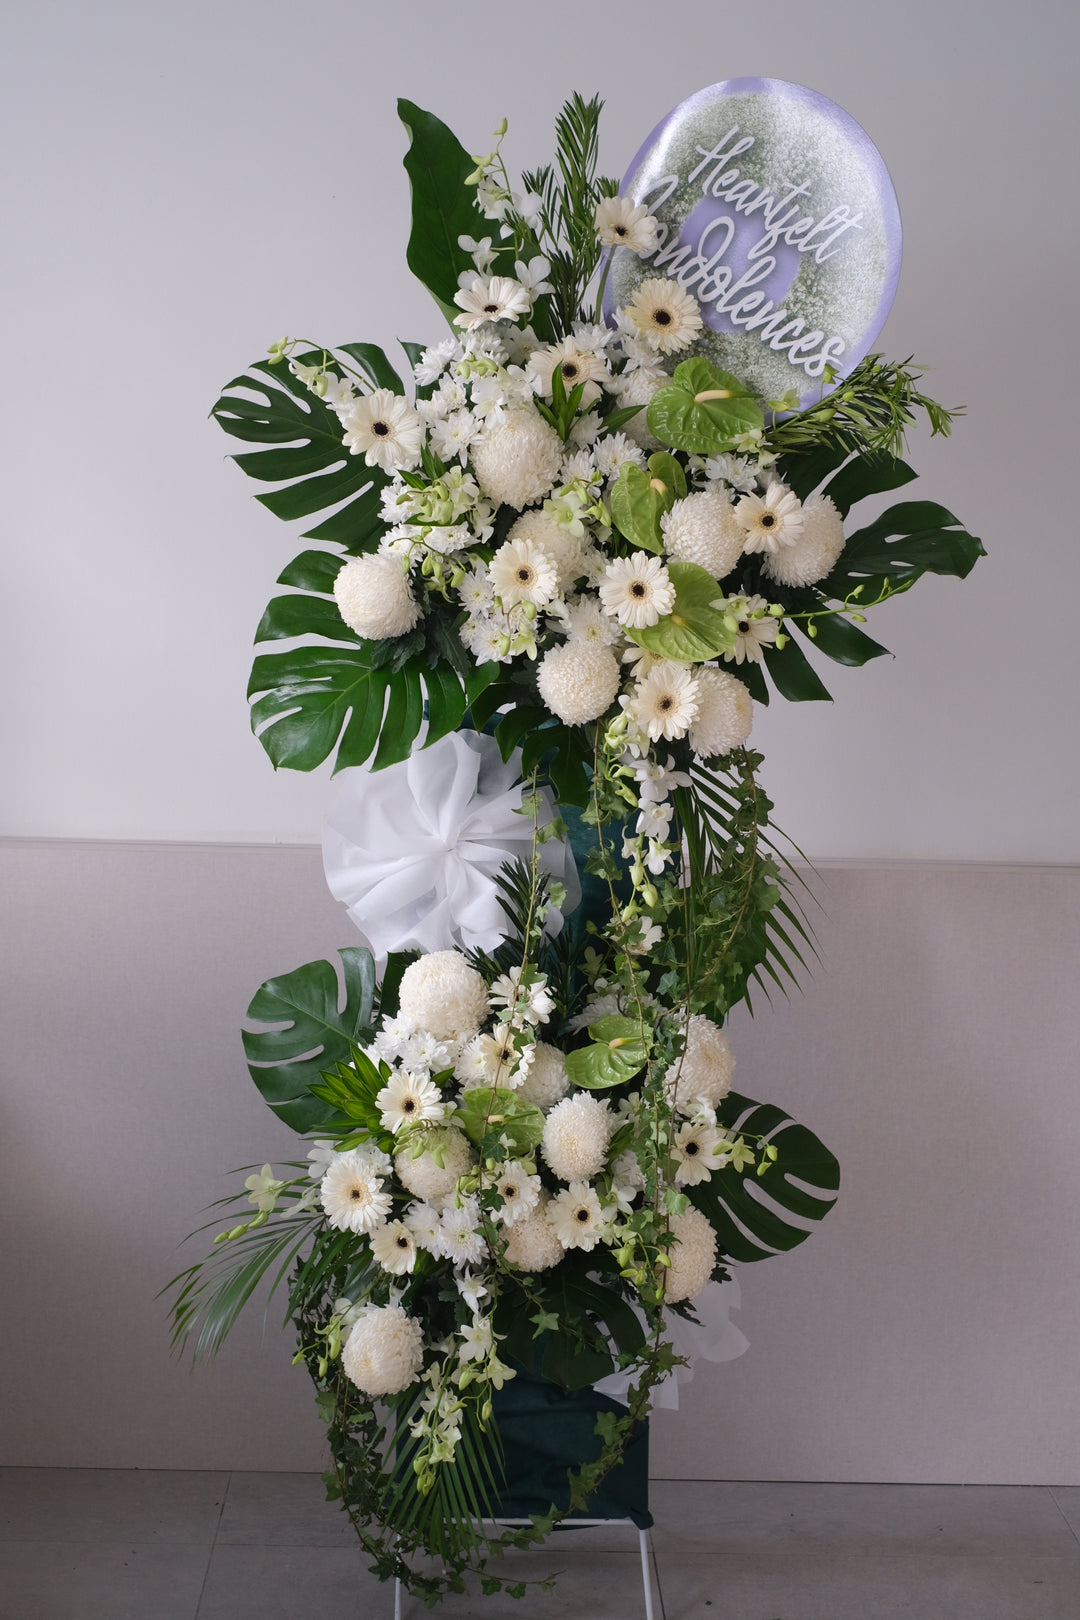 Let the family members know you care and understand with a simple gesture with the condolences stand comprises with white chrysanthemums, ping pongs, anthuriums, daisies, golden showers and lush leaves. For same day condolences flowers delivery in Penang.